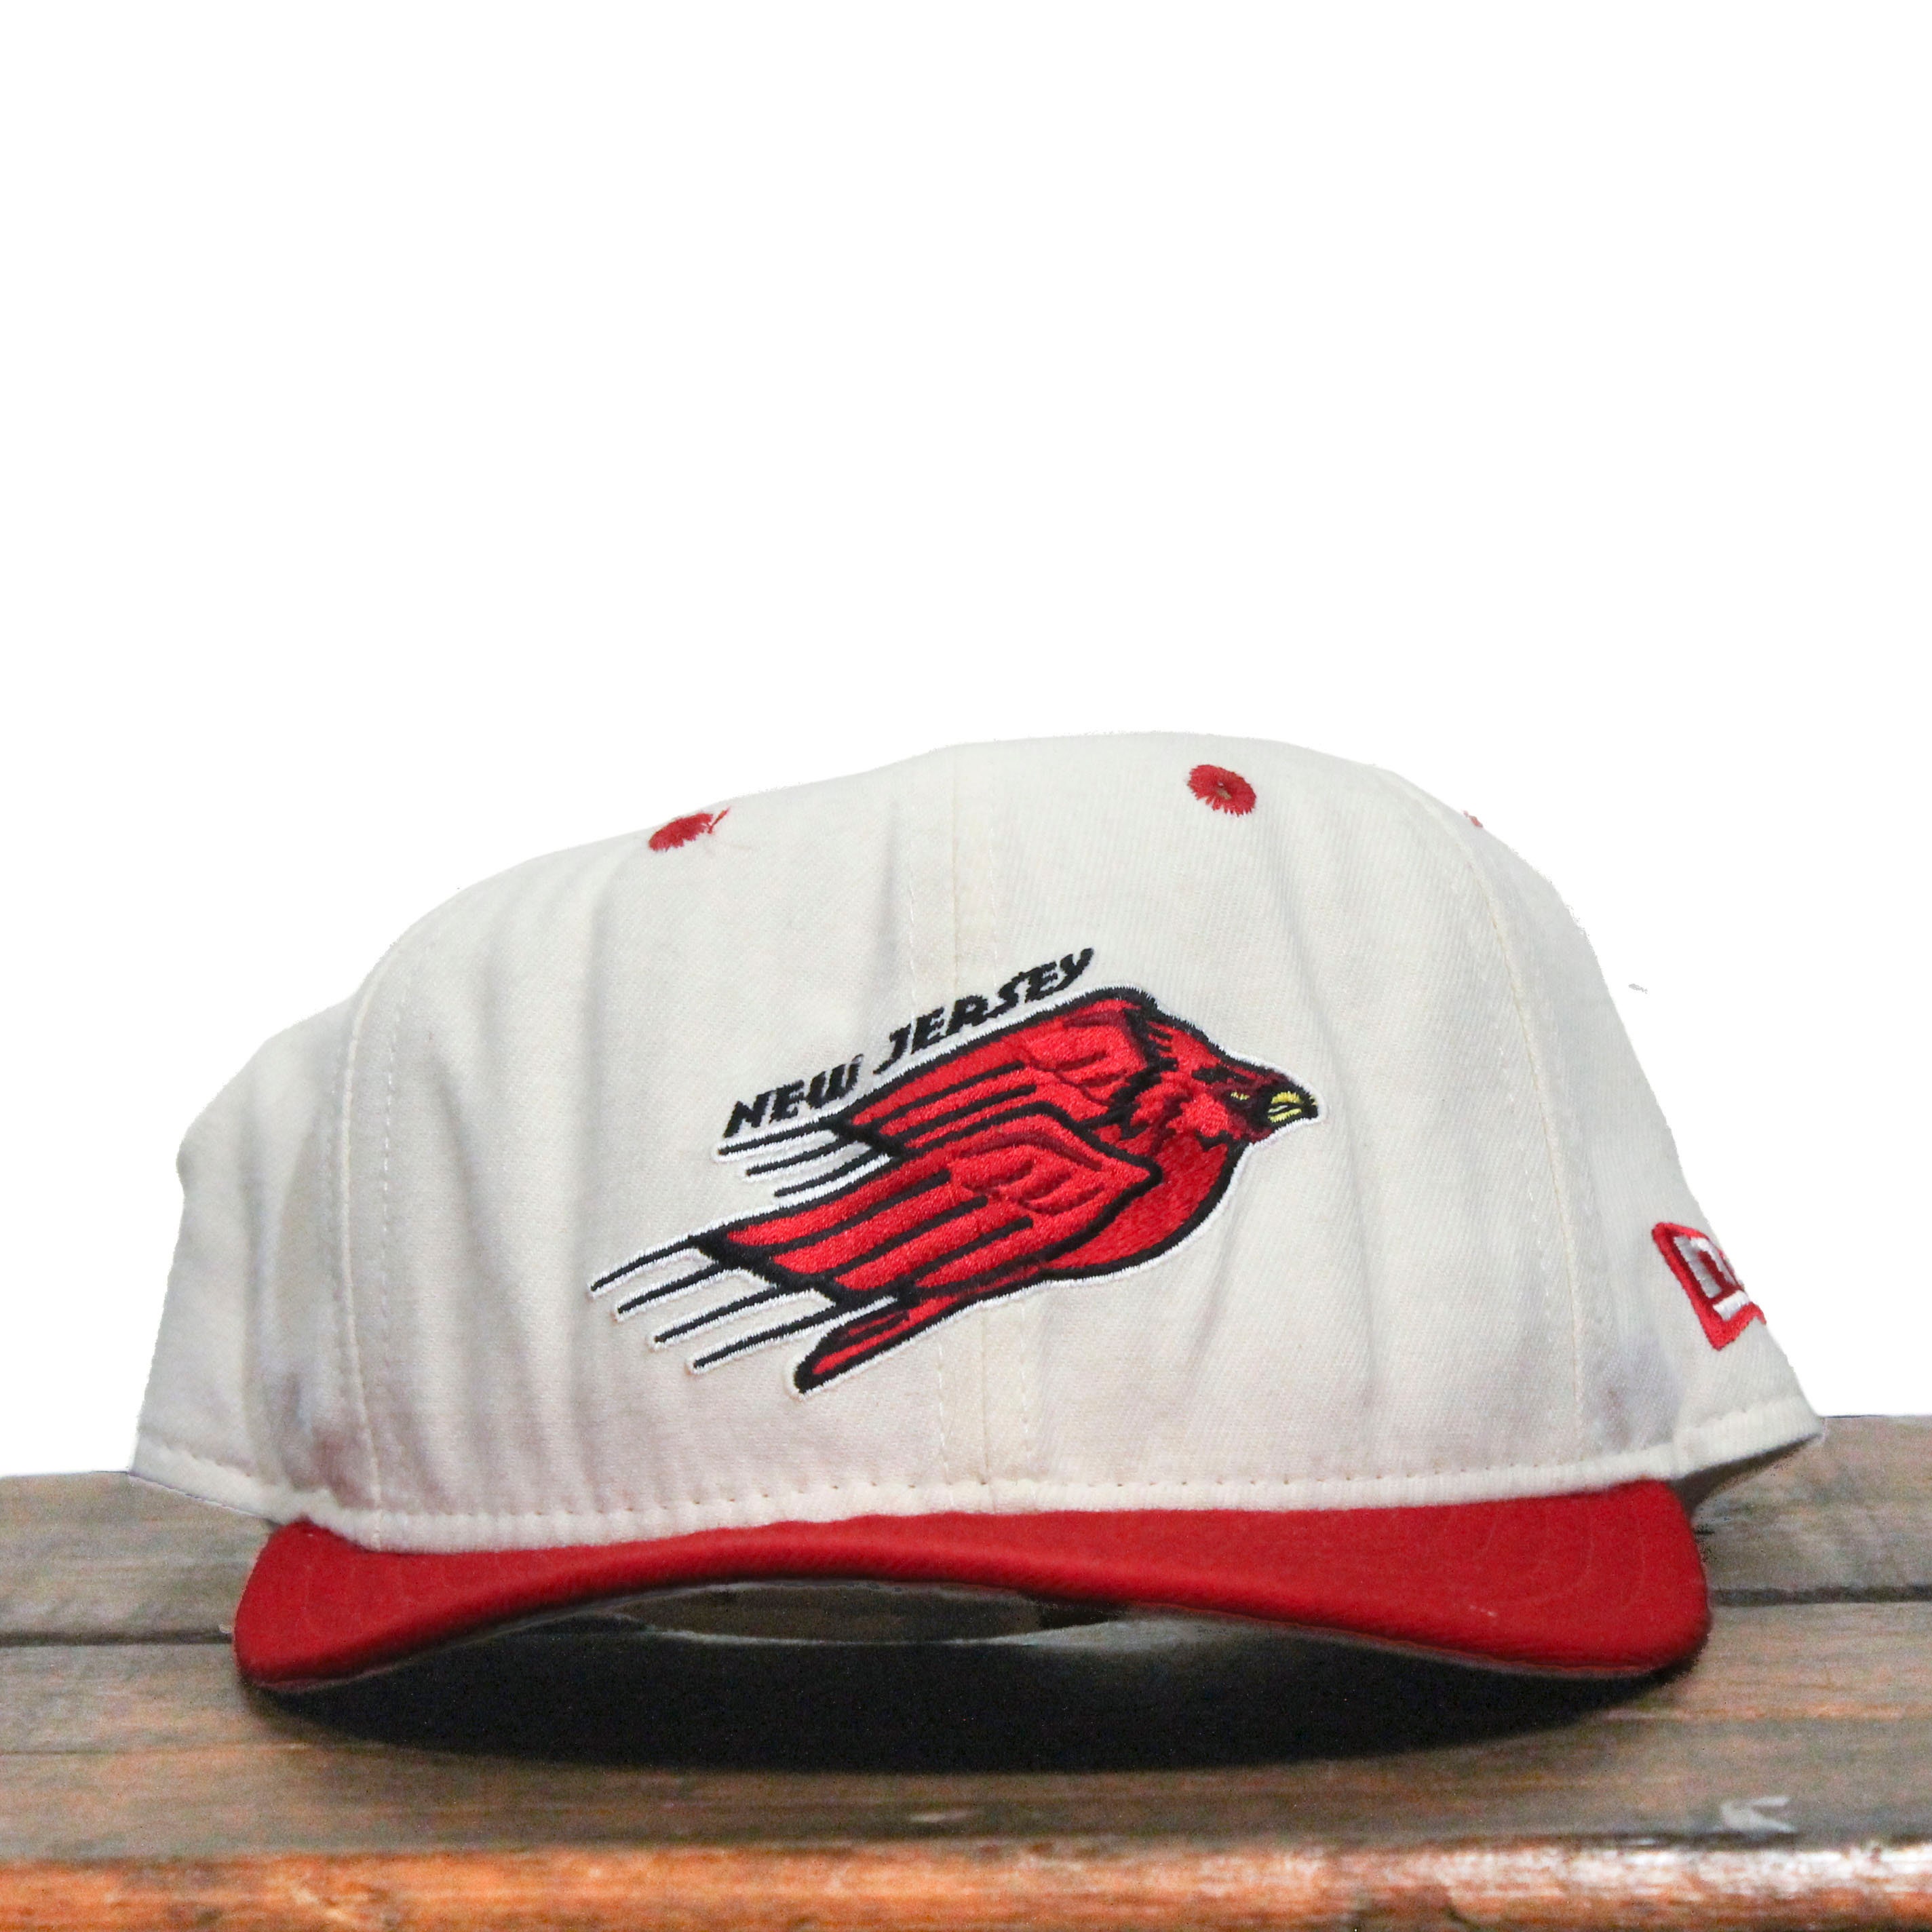 Vintage 90s New Jersey Cardinals Minor League Milb Team St Louis Cardinals New Era Wool Fitted Hat Baseball Cap 7 3/8 Made in USA